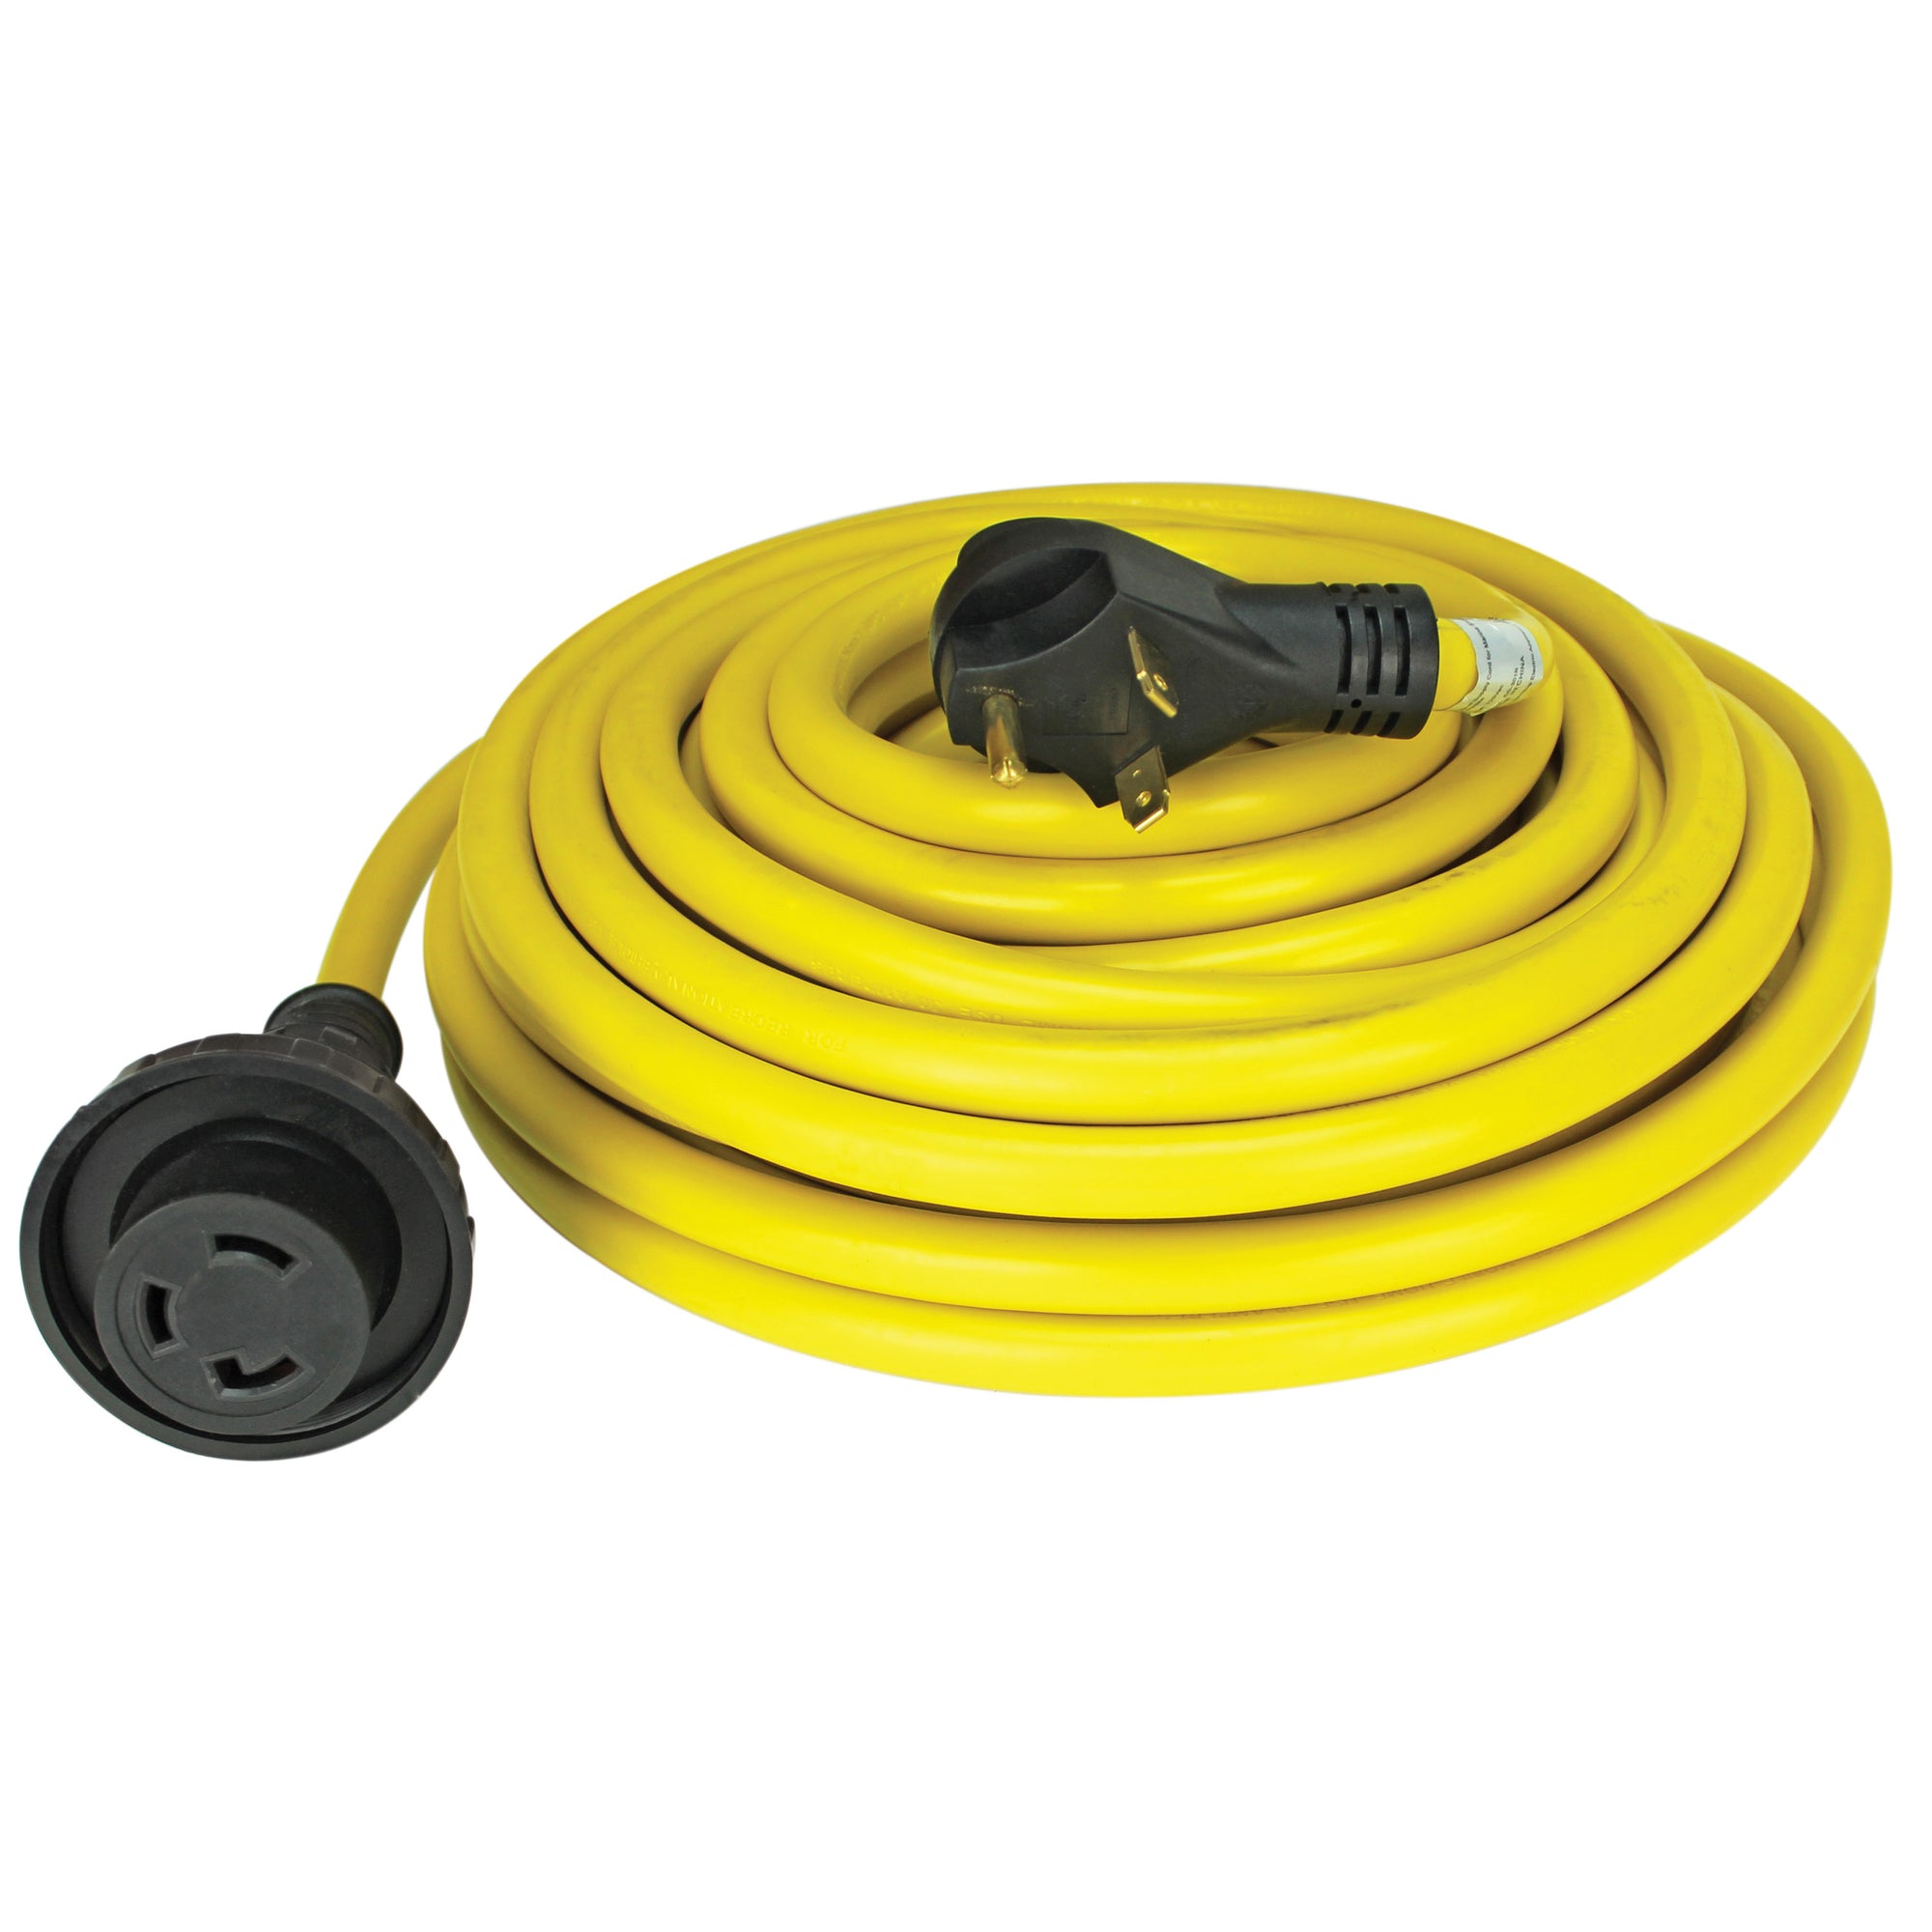 50' 30 AMP RV CORD WITH CONNECTOR PLUG W/HANDLES